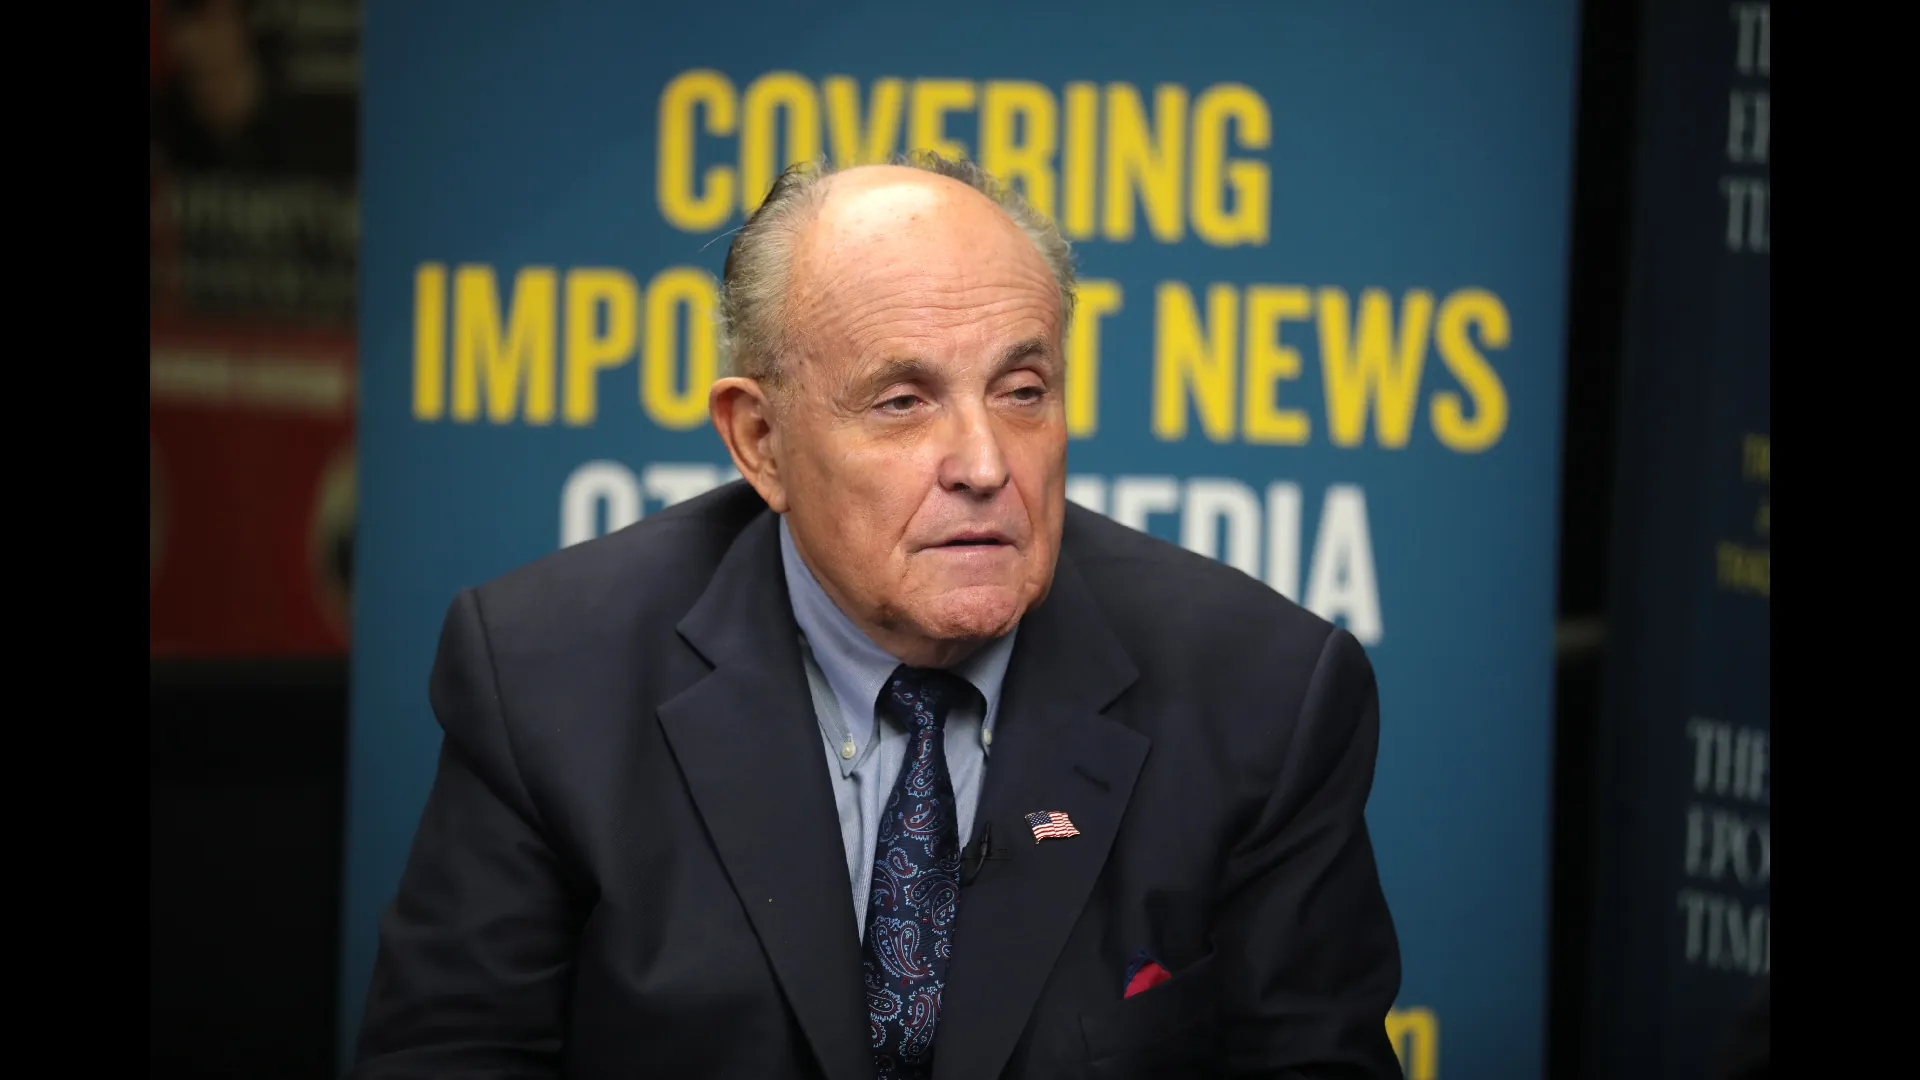 Rudy Giuliani's False Statements Exposed: Accused of Defamation in Georgia Election Worker Lawsuit